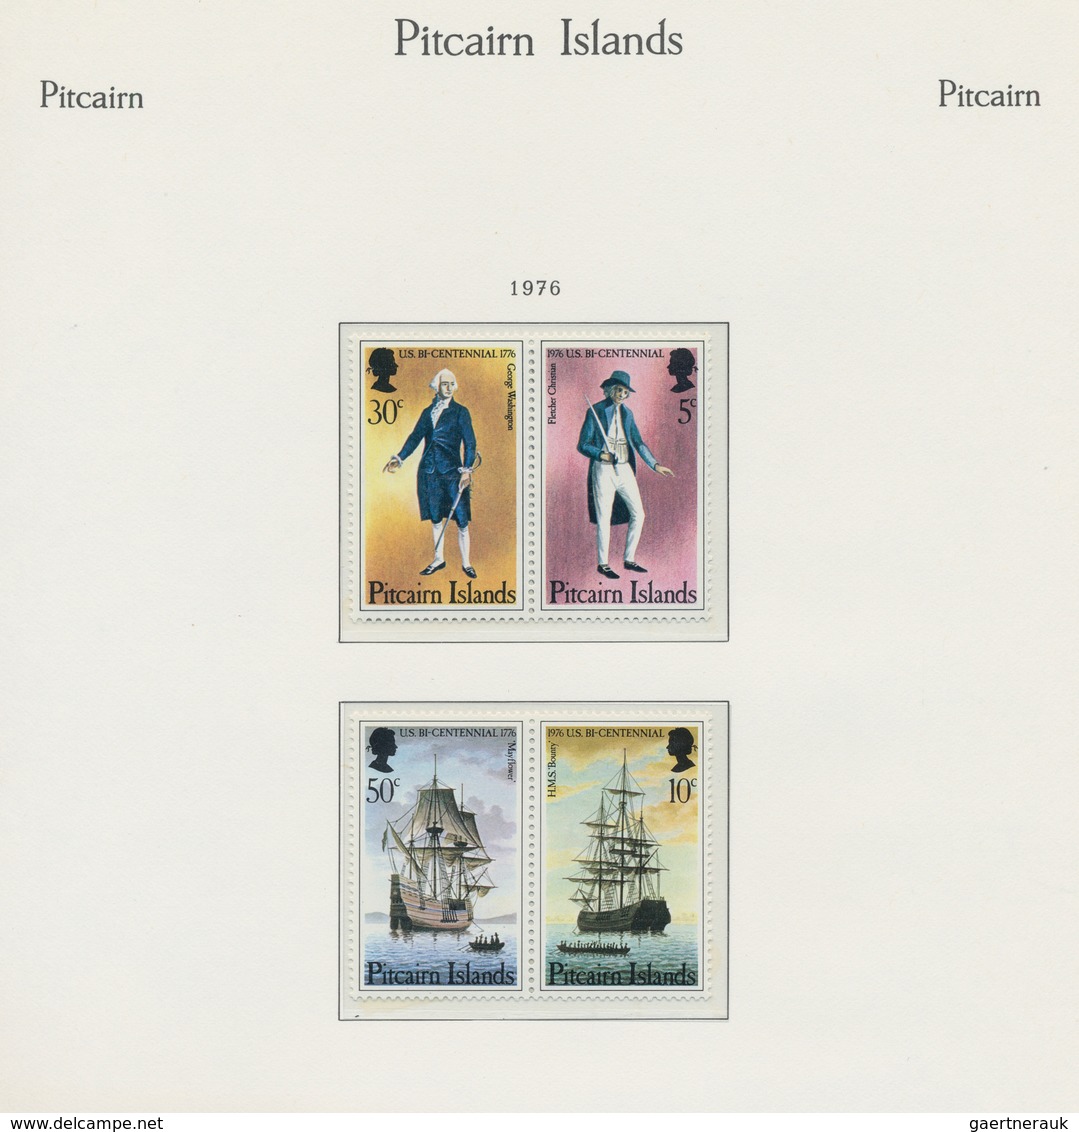 23878 Pitcairn: 1940/1999, almost exclusively u/m collection (only a few are hinged) in a KA/BE binder, ac